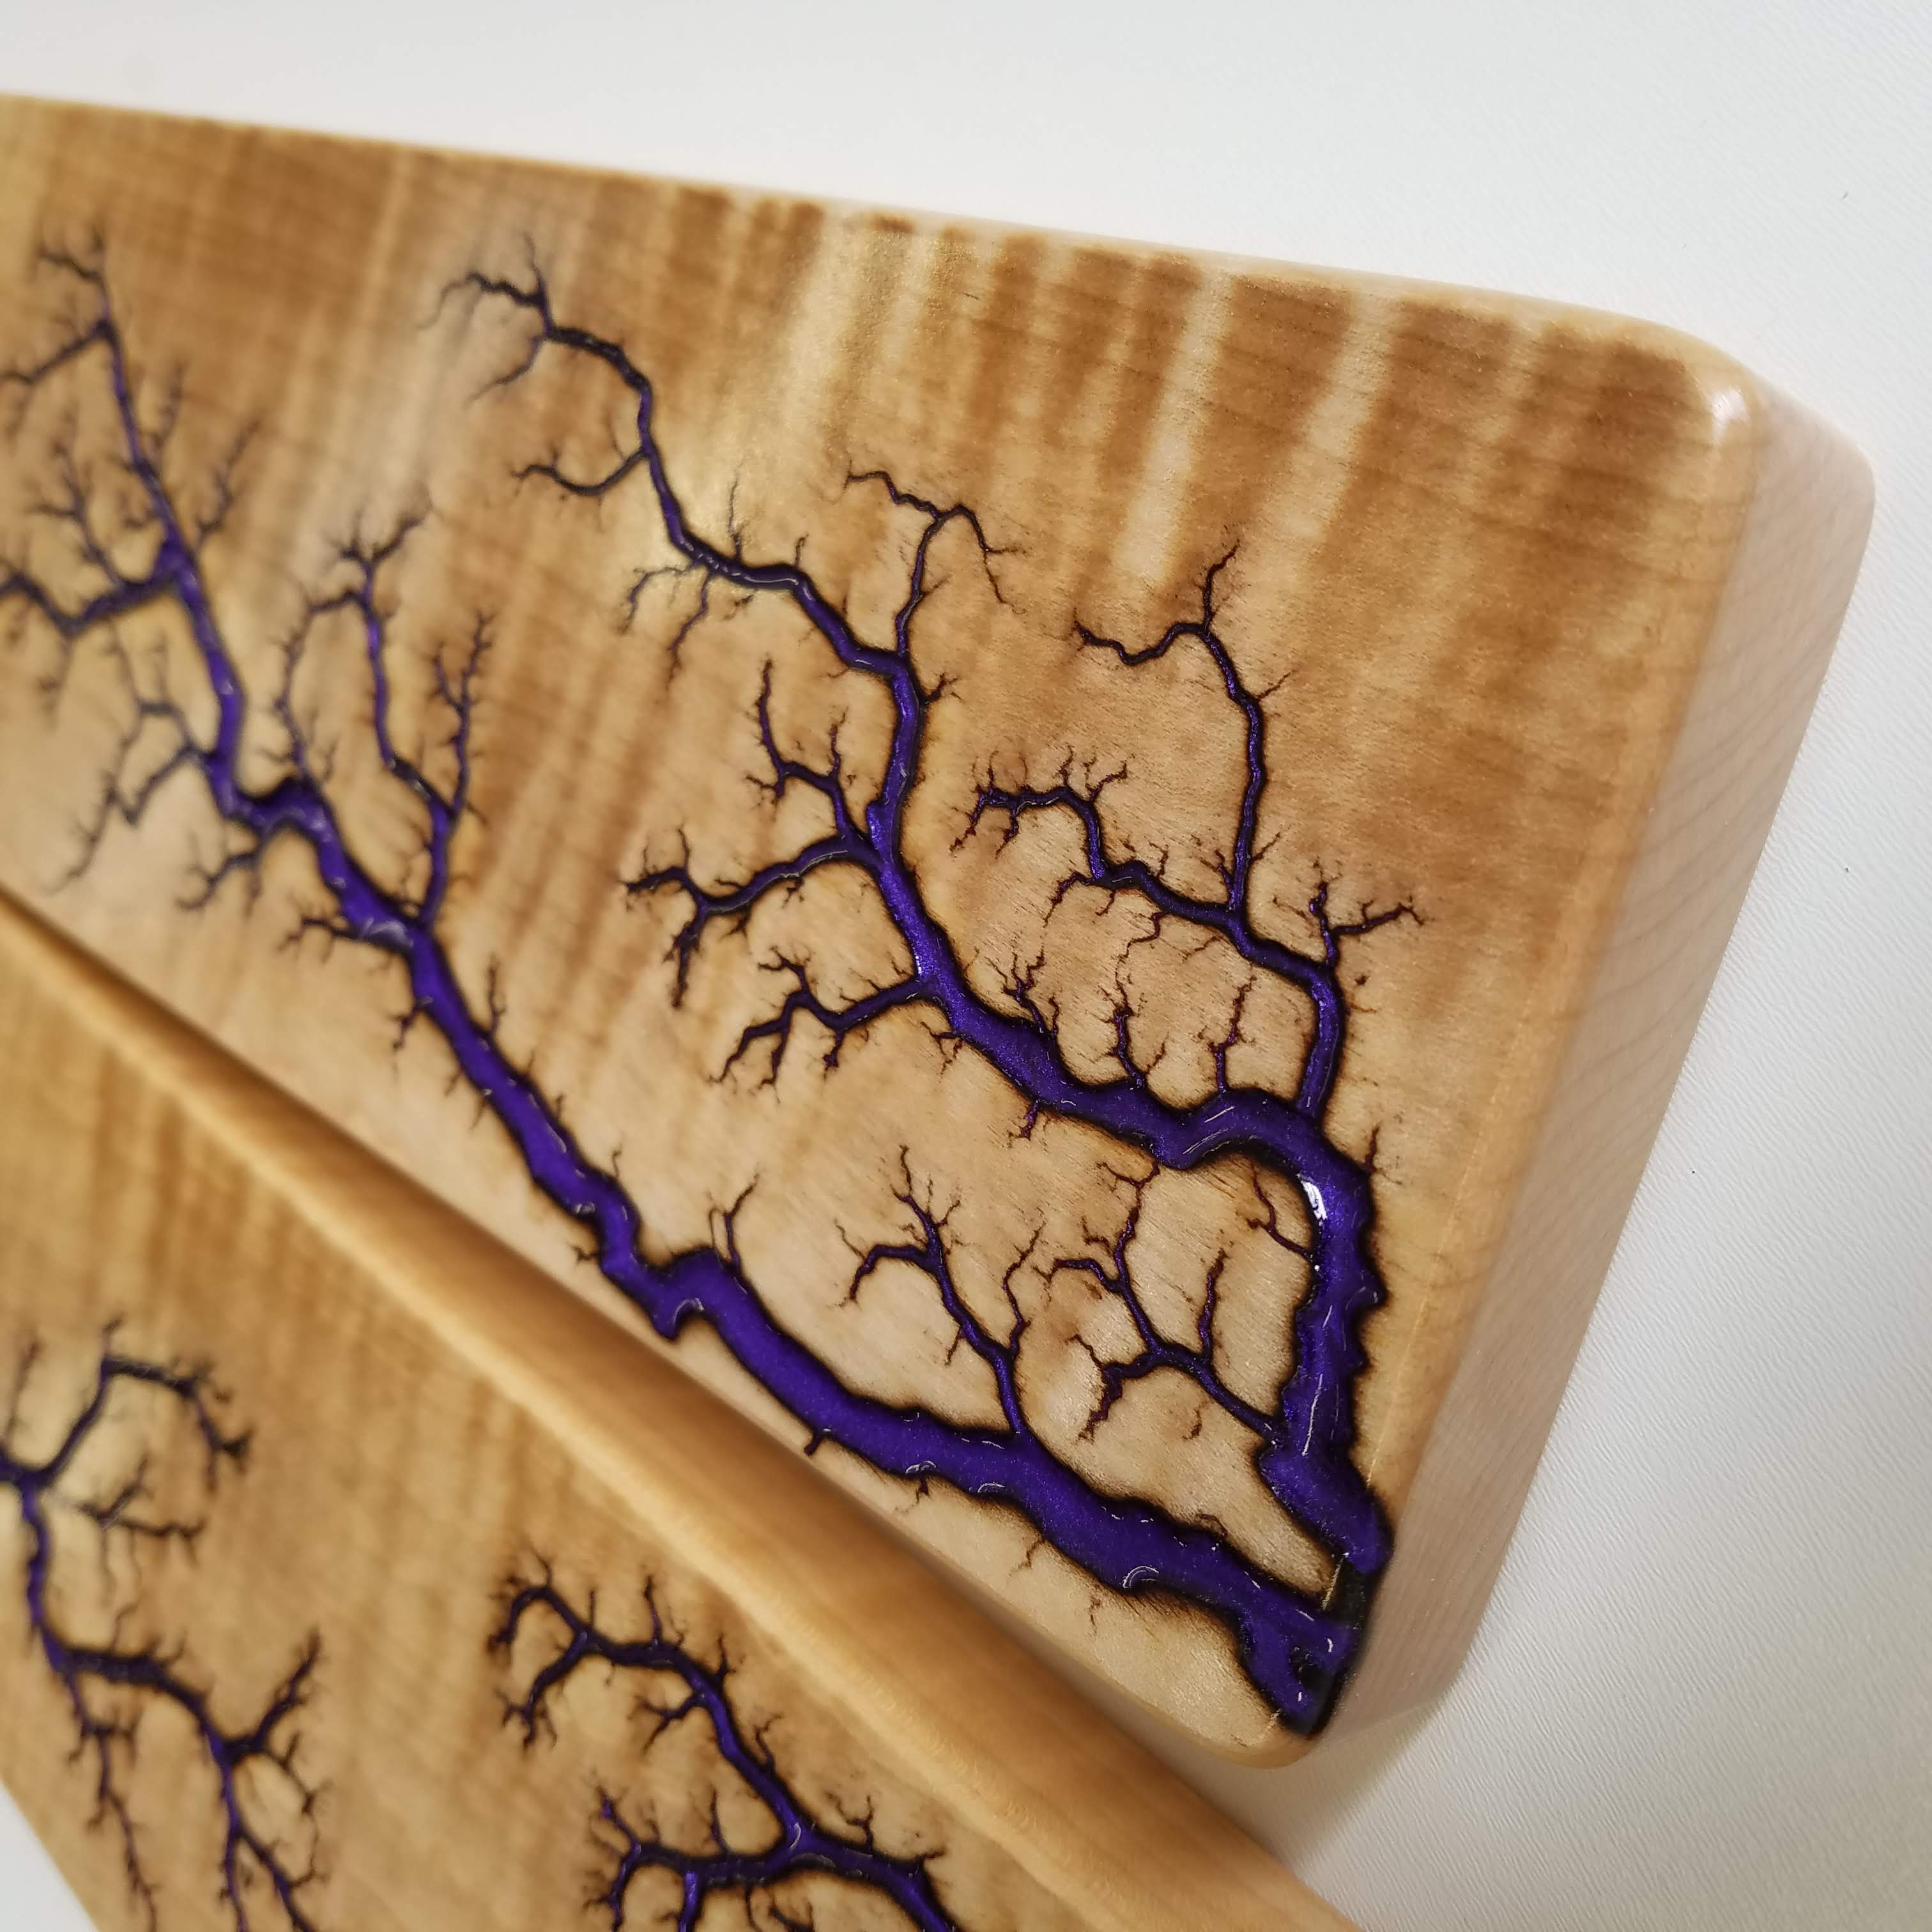 CURLY MAPLE Wrist Rest (Full size 17.5", Deep Purple Resin Inlay)